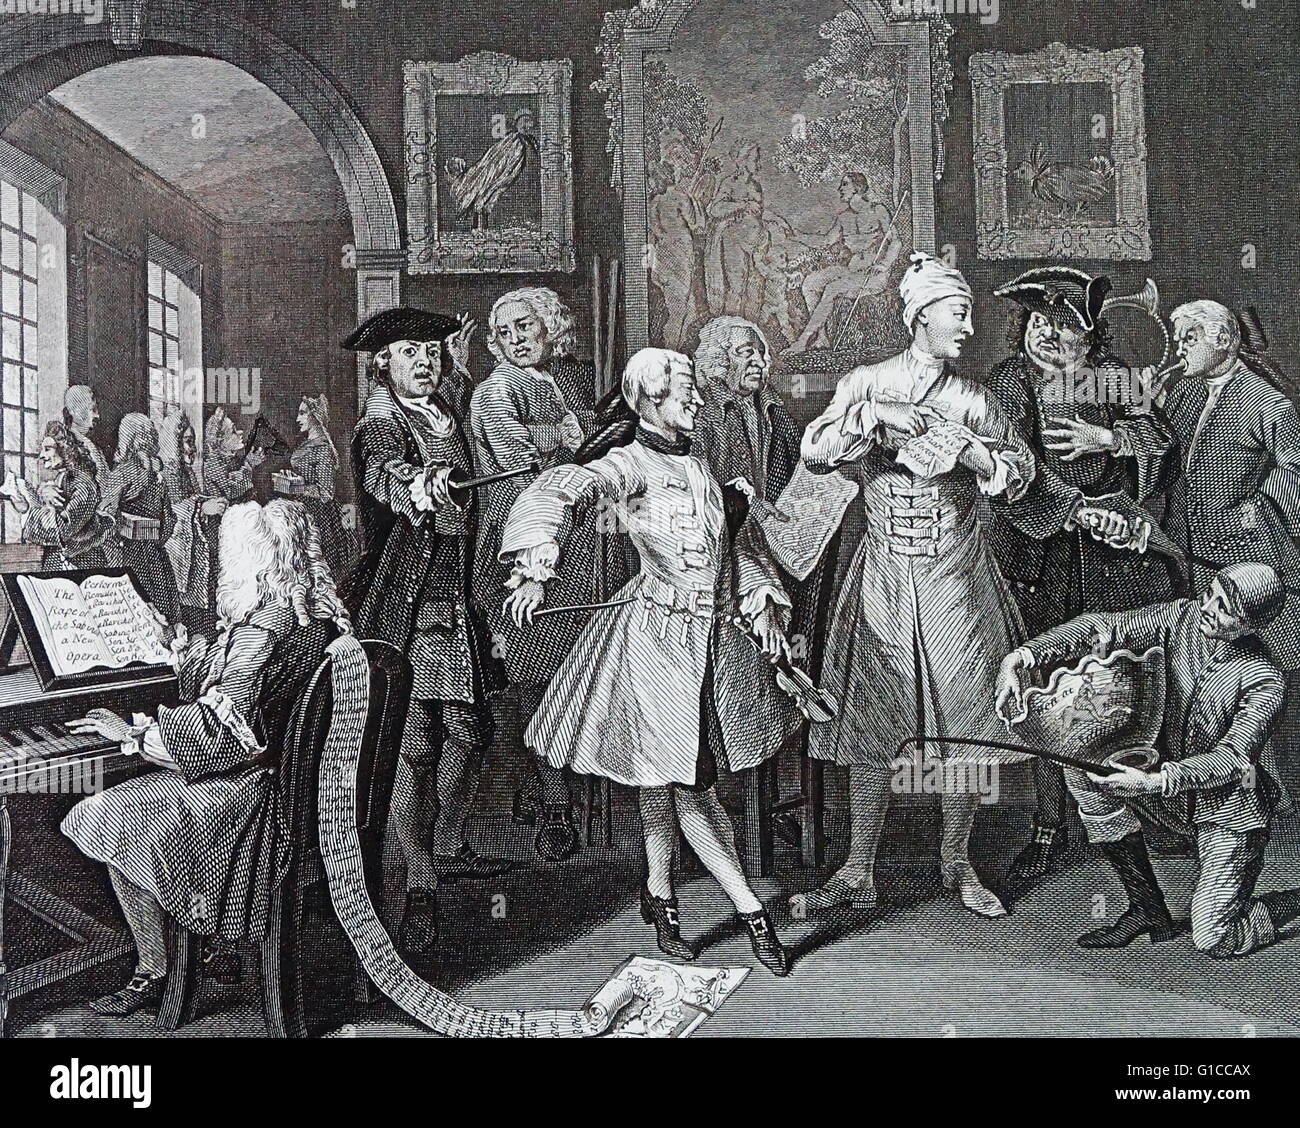 A Rake's Progress - Plate 2 - Surrounded By Artists And Professors by William Hogarth (1697 – 1764). English painter, printmaker, pictorial satirist. Stock Photo